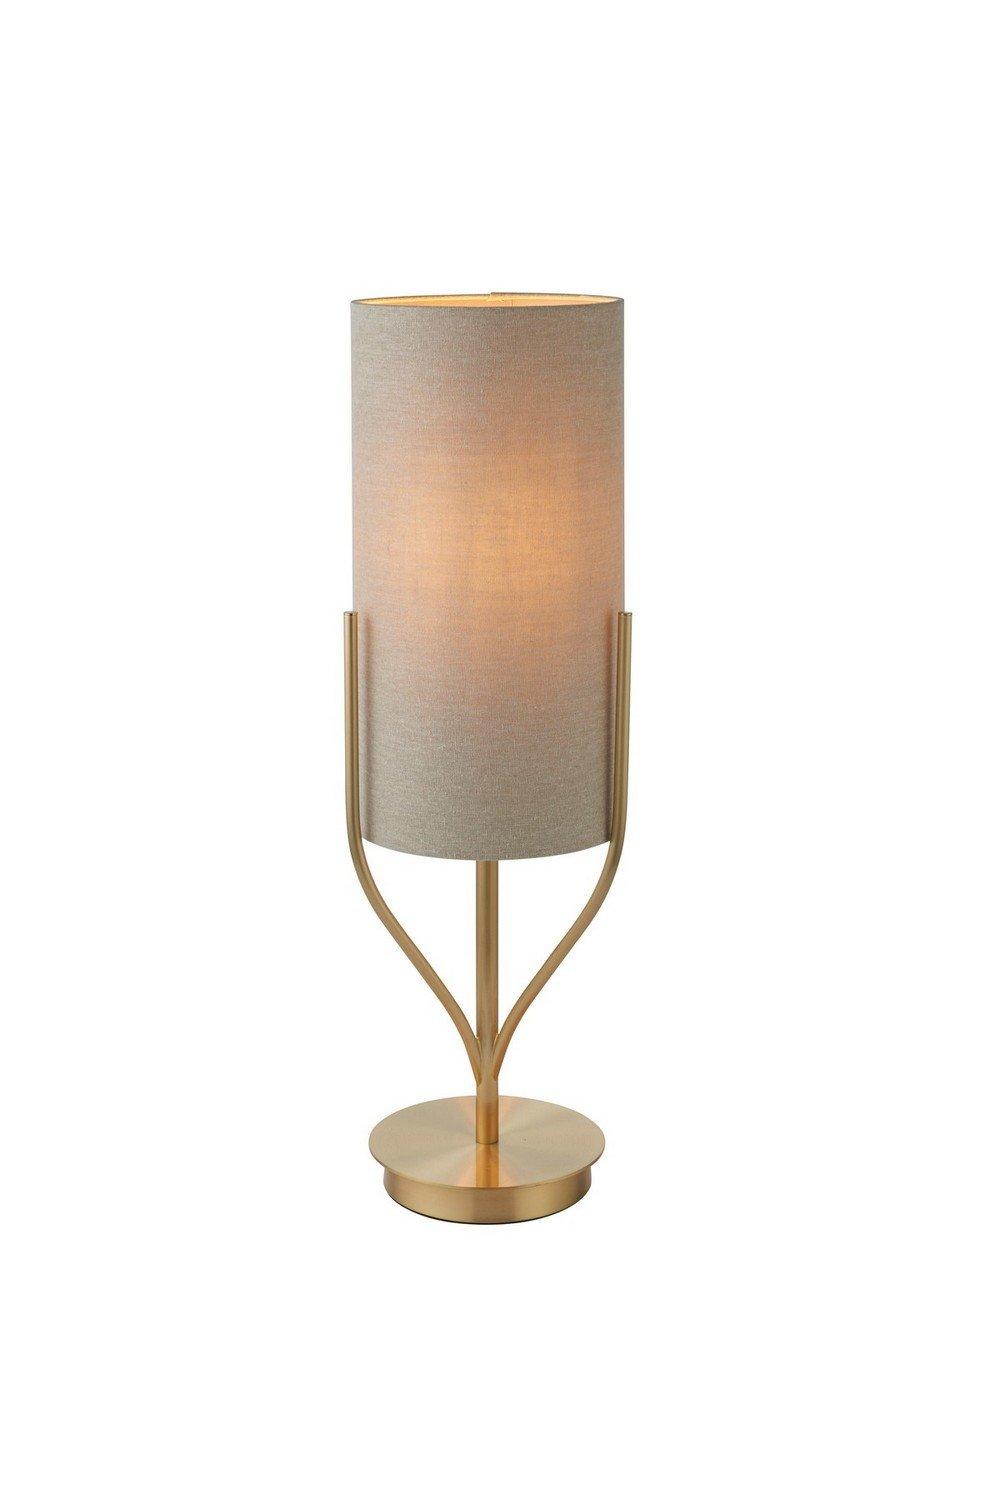 Fraser Base & Shade Table Lamp Satin Brass Plate Natural Linen Mix Fabric